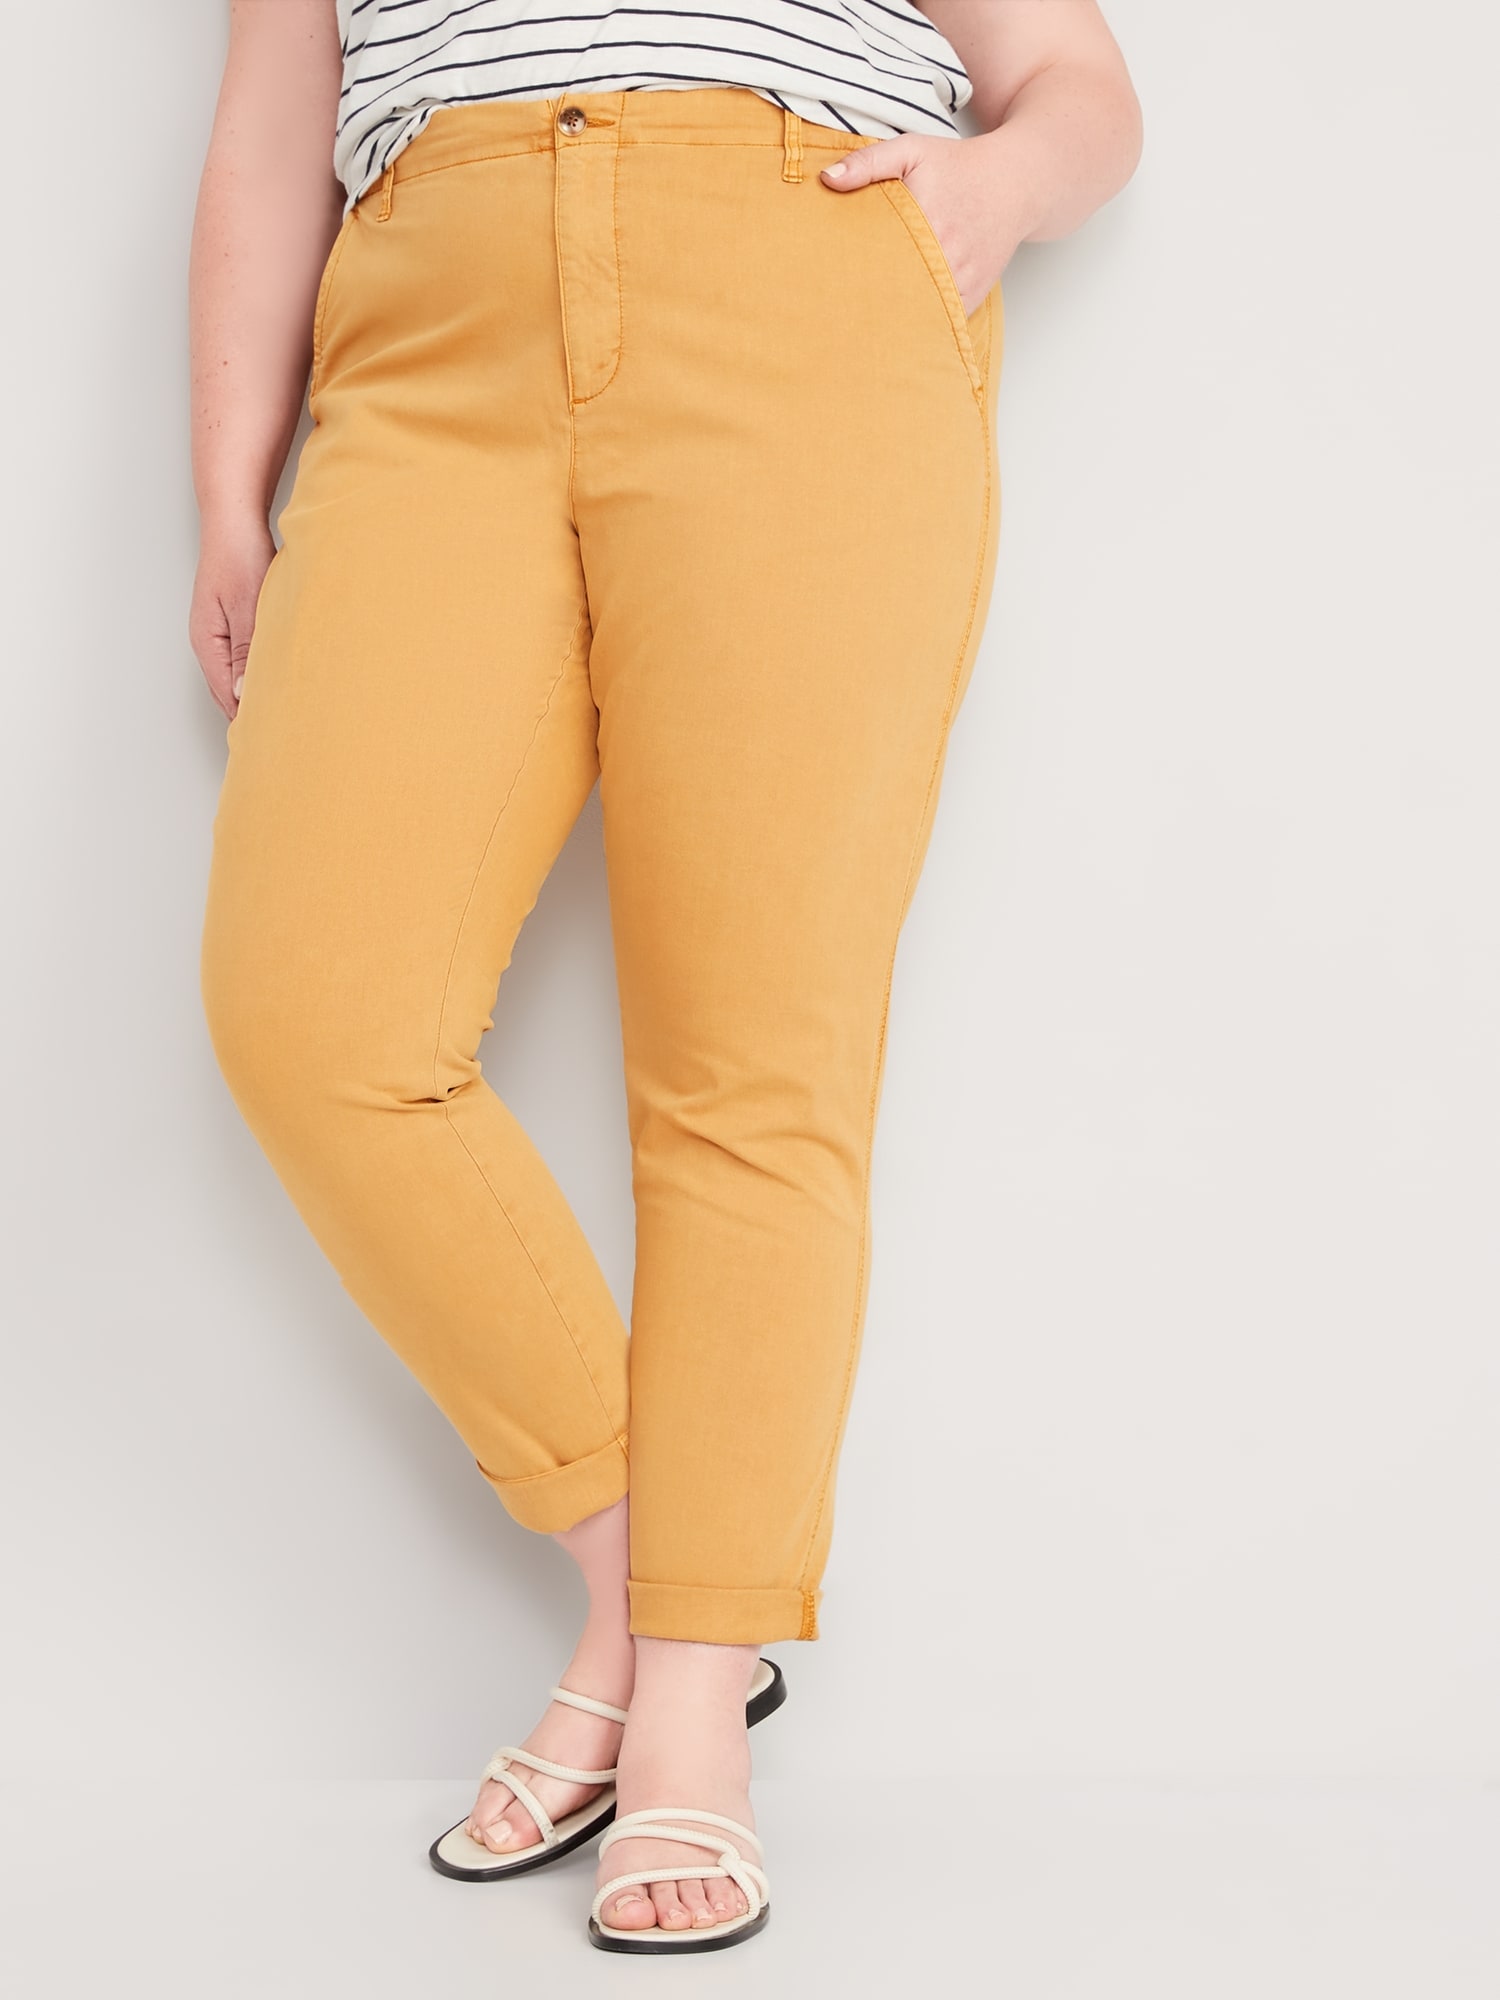 High Waisted Ogc Chino Pants For Women Old Navy